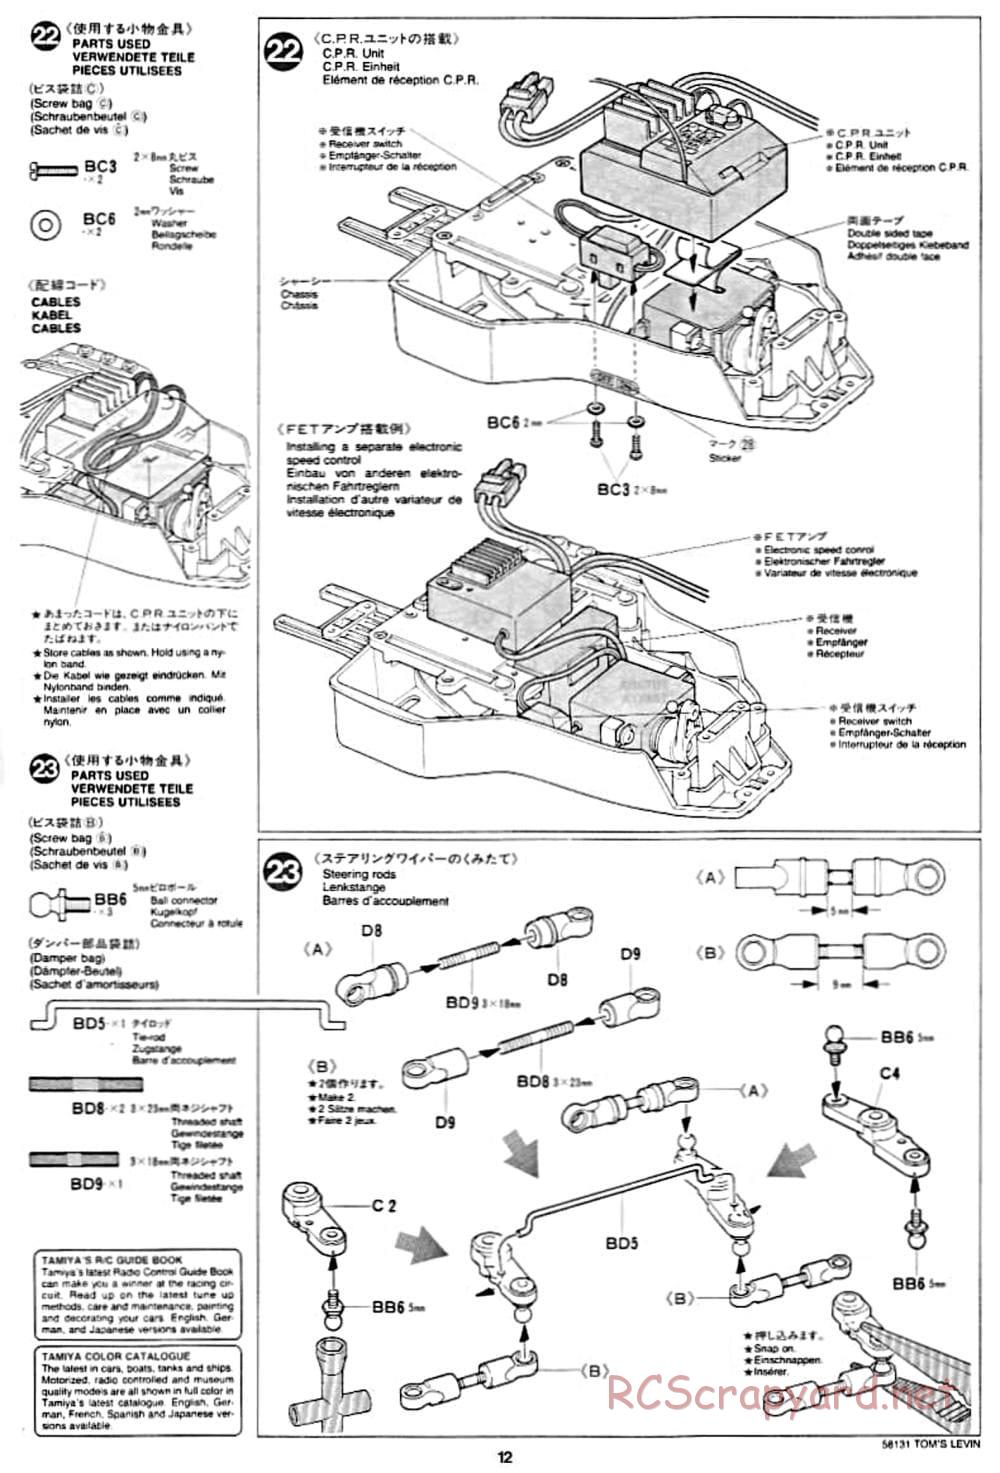 Tamiya - Toyota Tom's Levin - FF-01 Chassis - Manual - Page 12